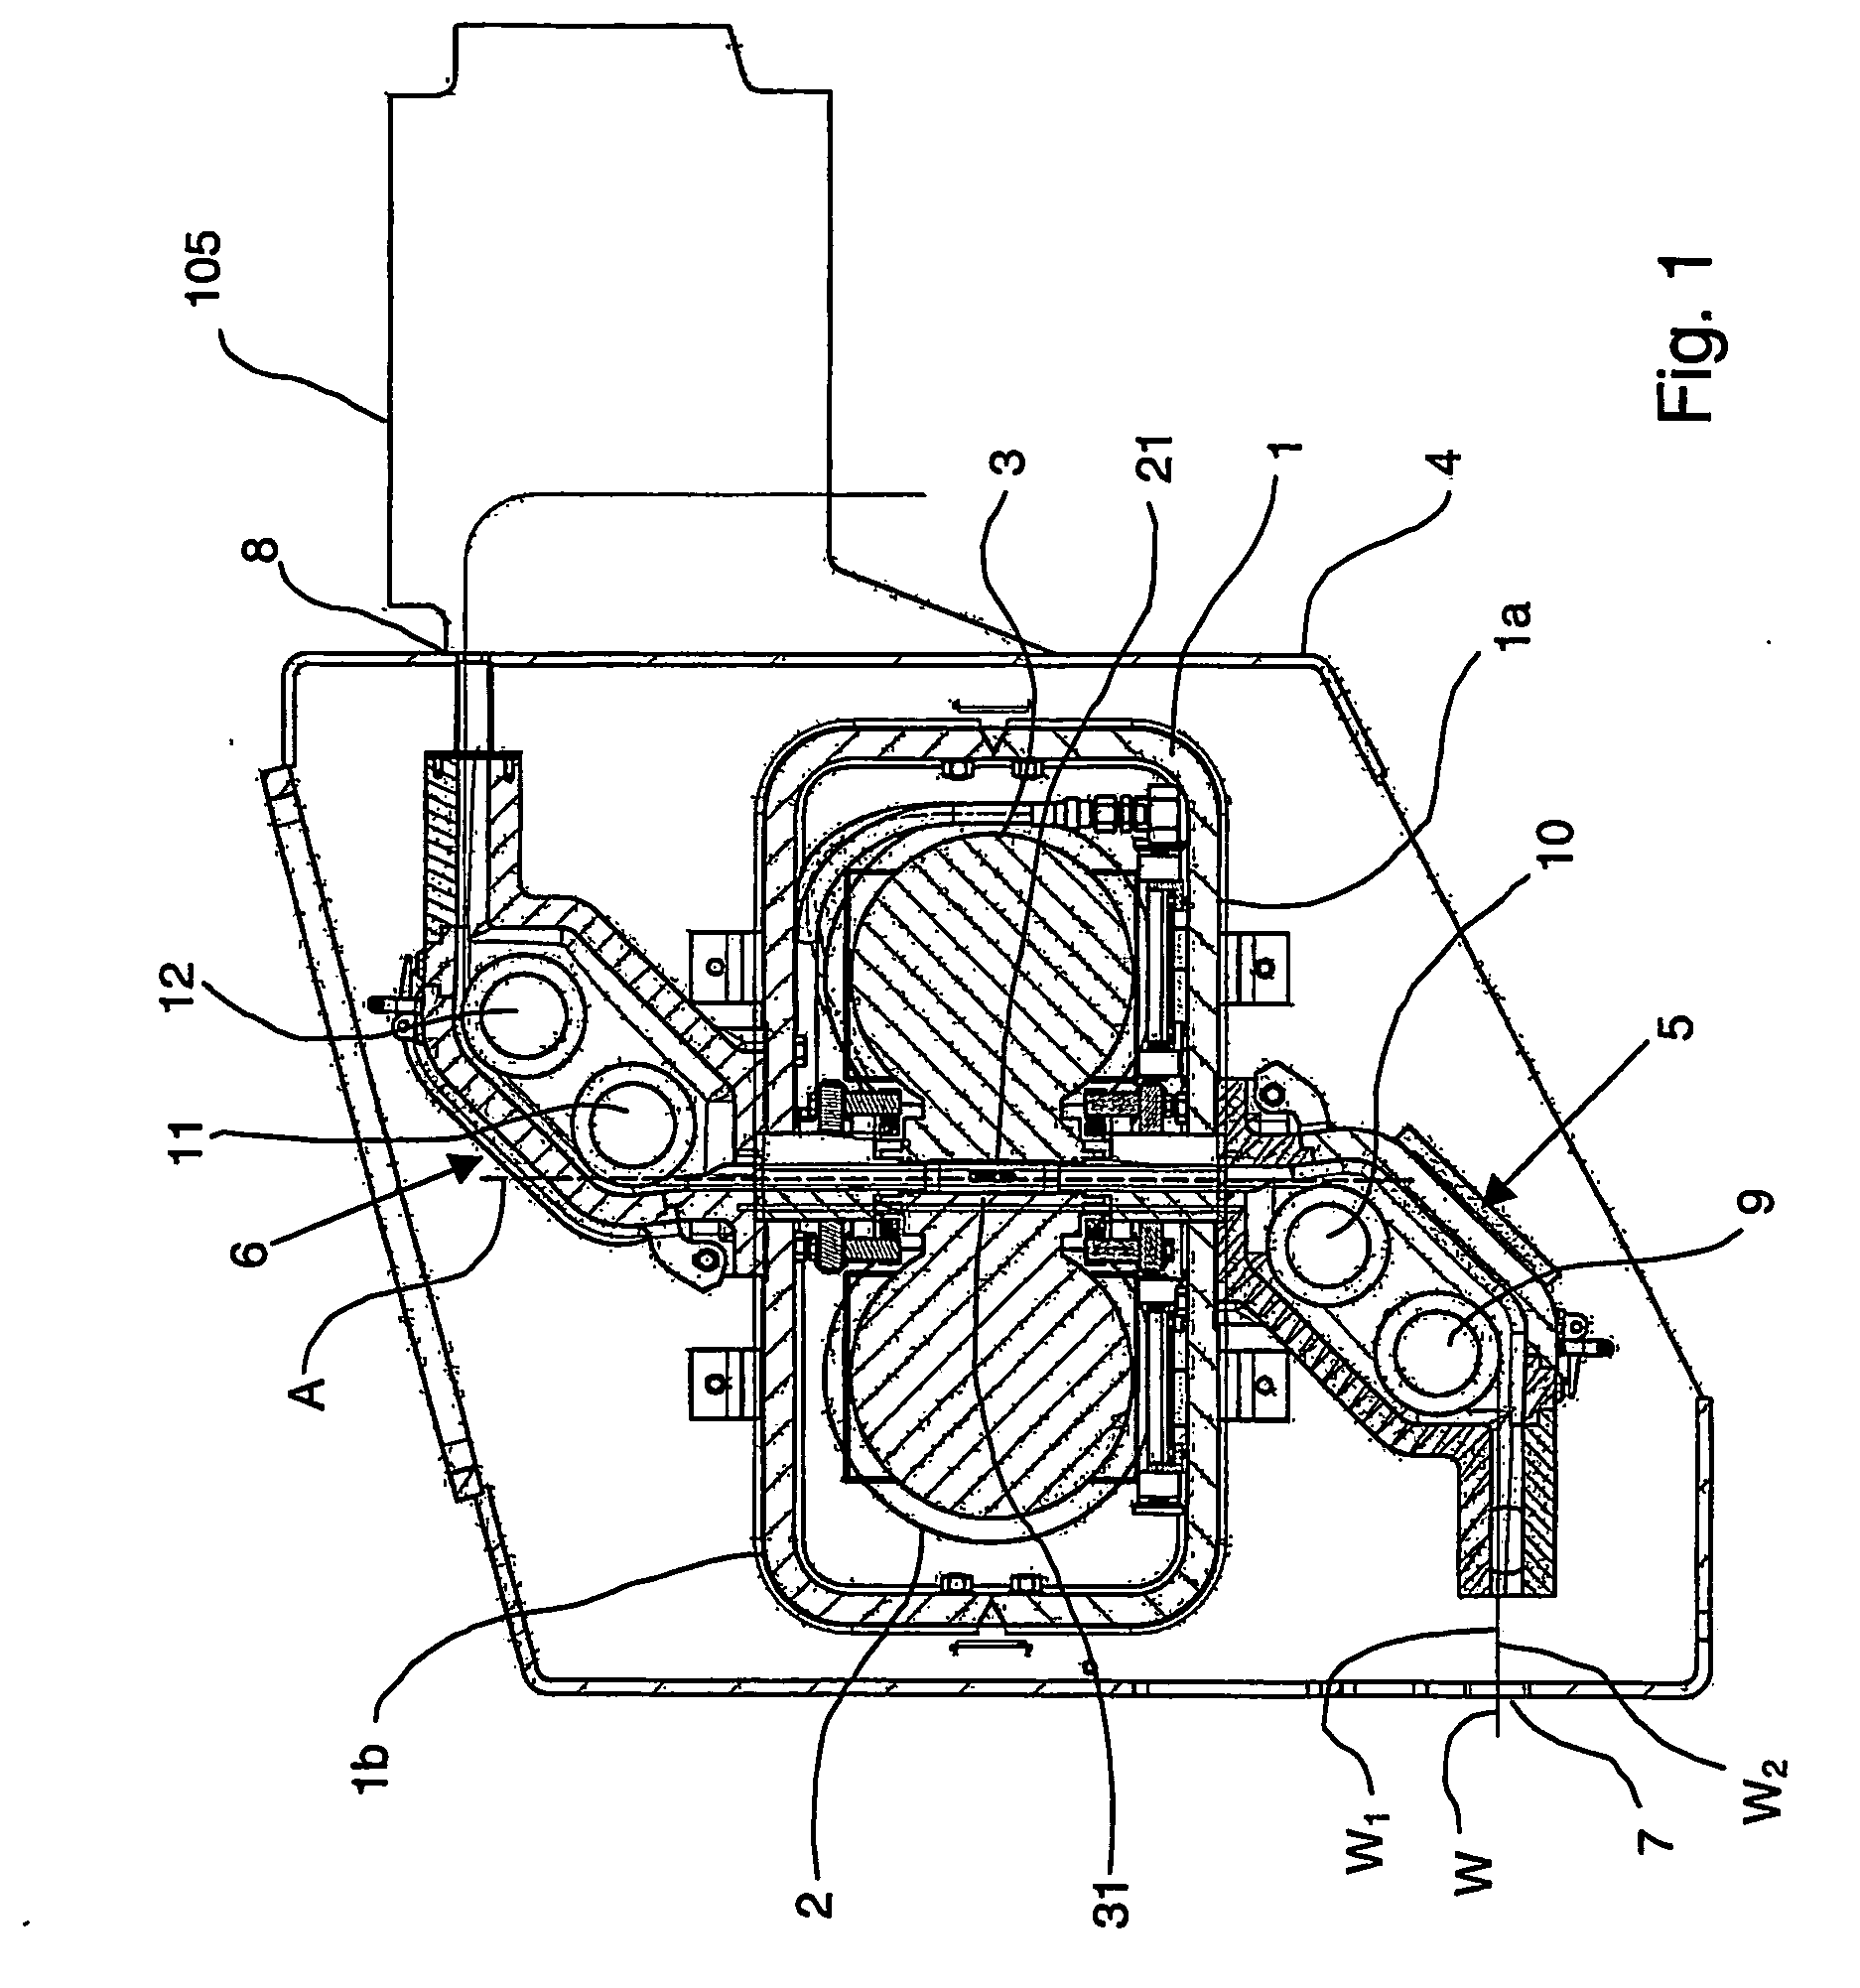 Device and method for electron beam irradiation